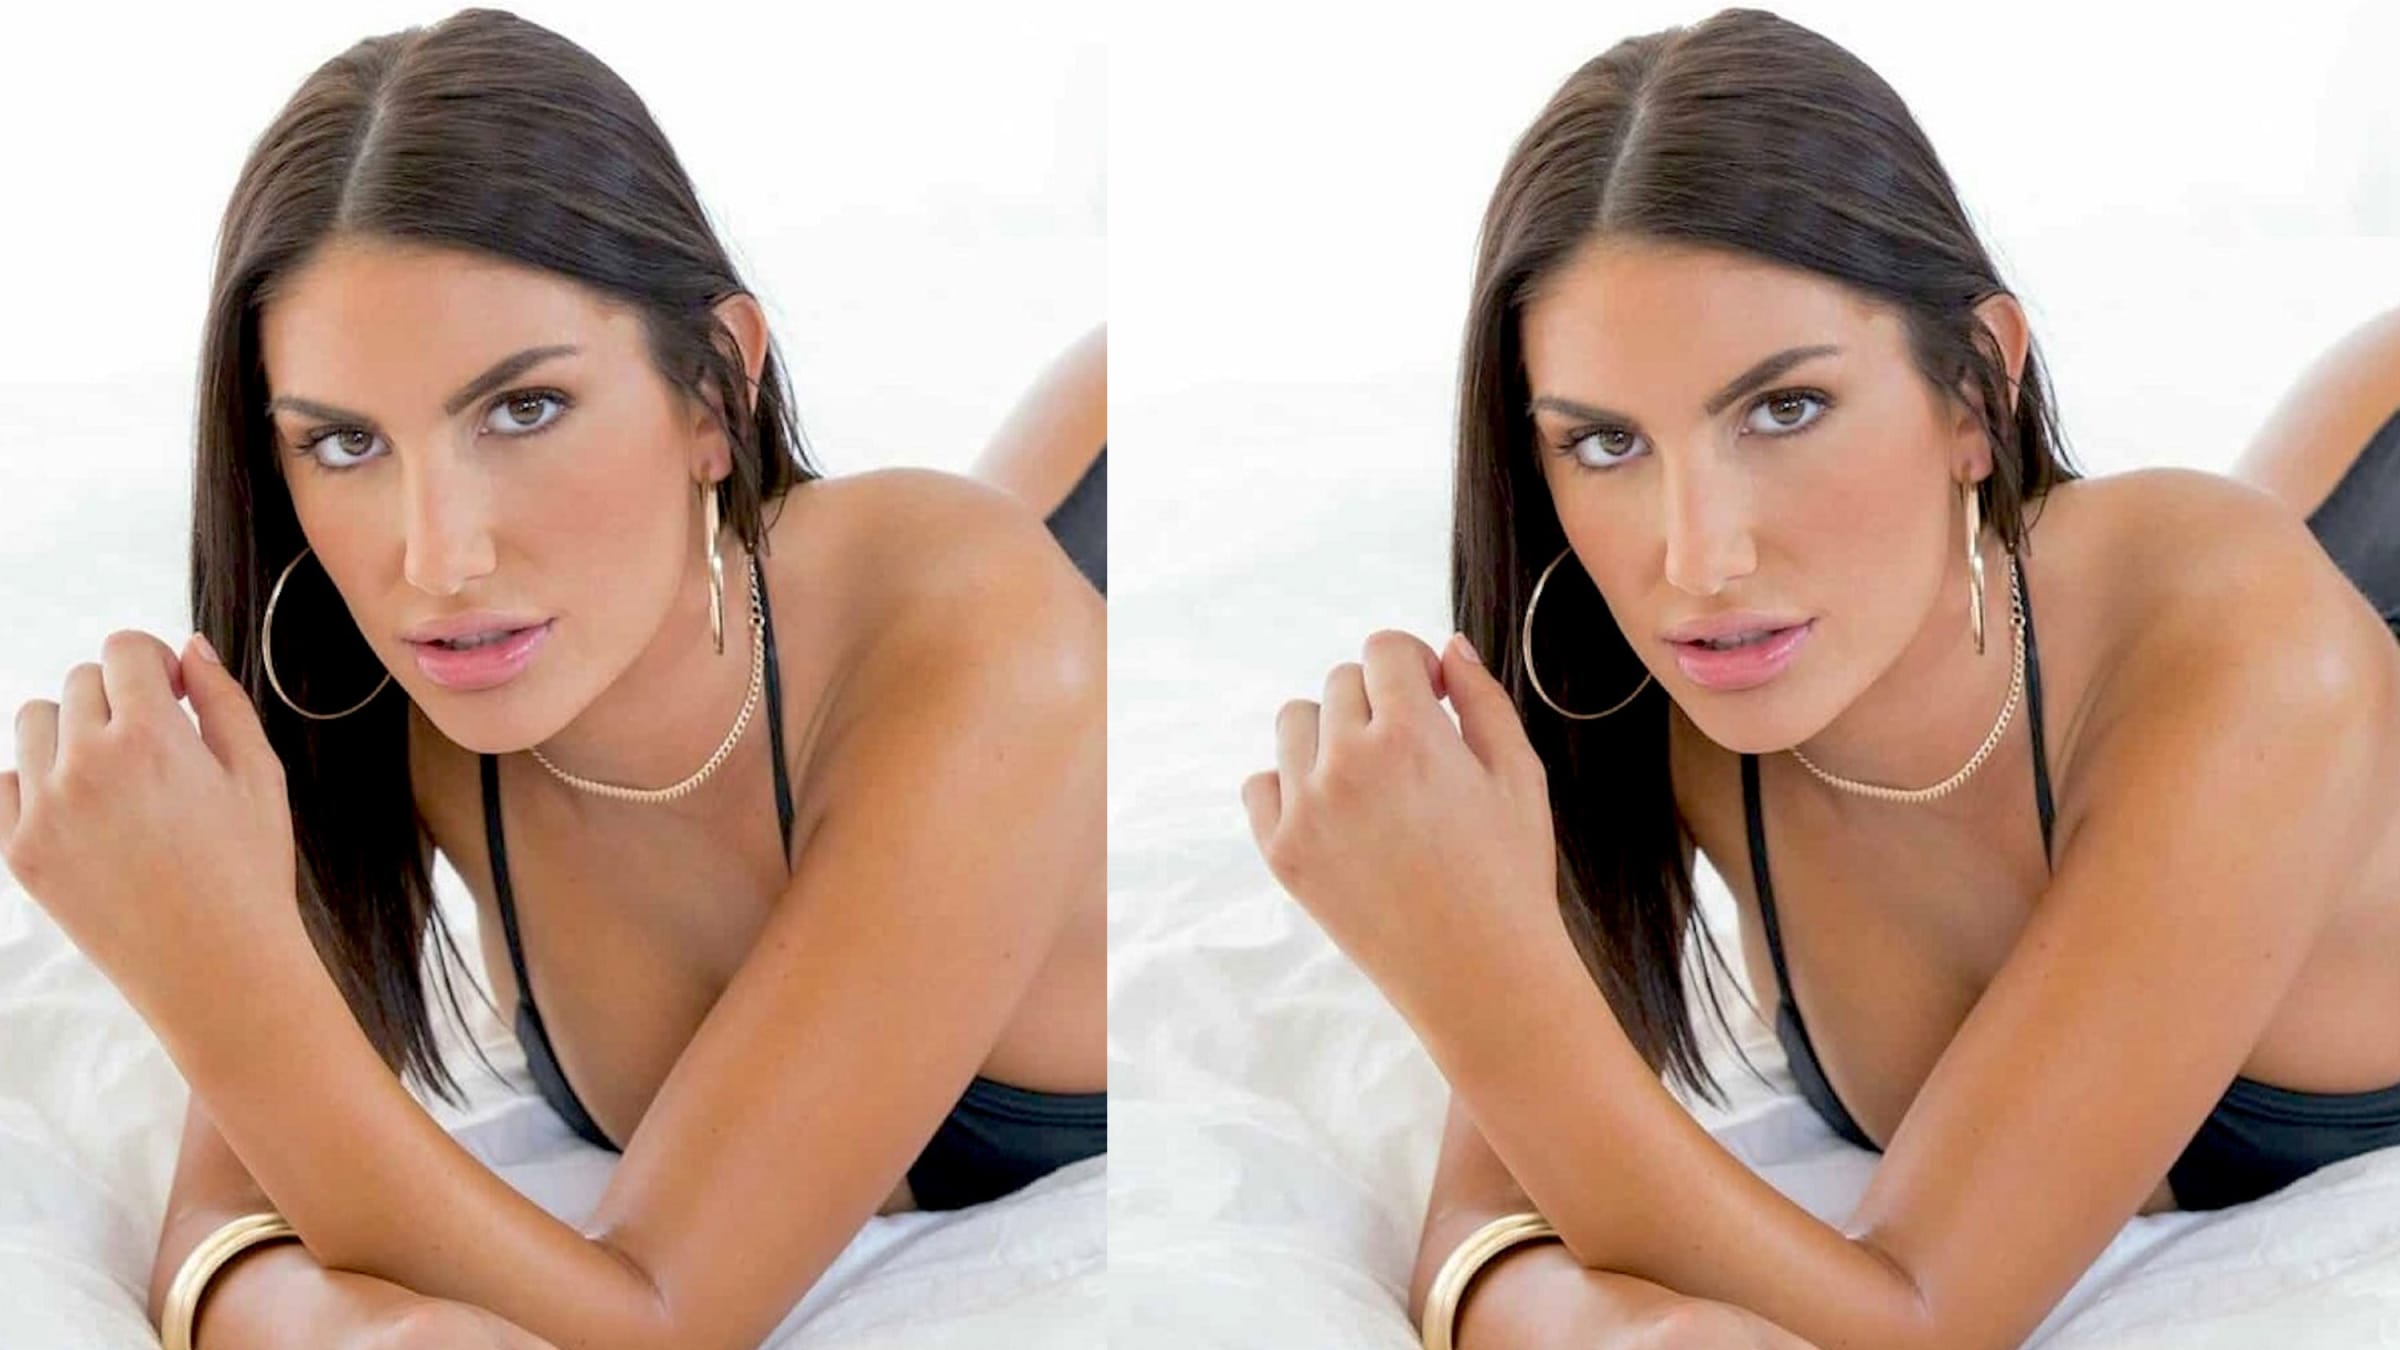 August Porn Star - Mother of 'Cyberbullied' Porn Star August Ames Opens Up About Her Last Days